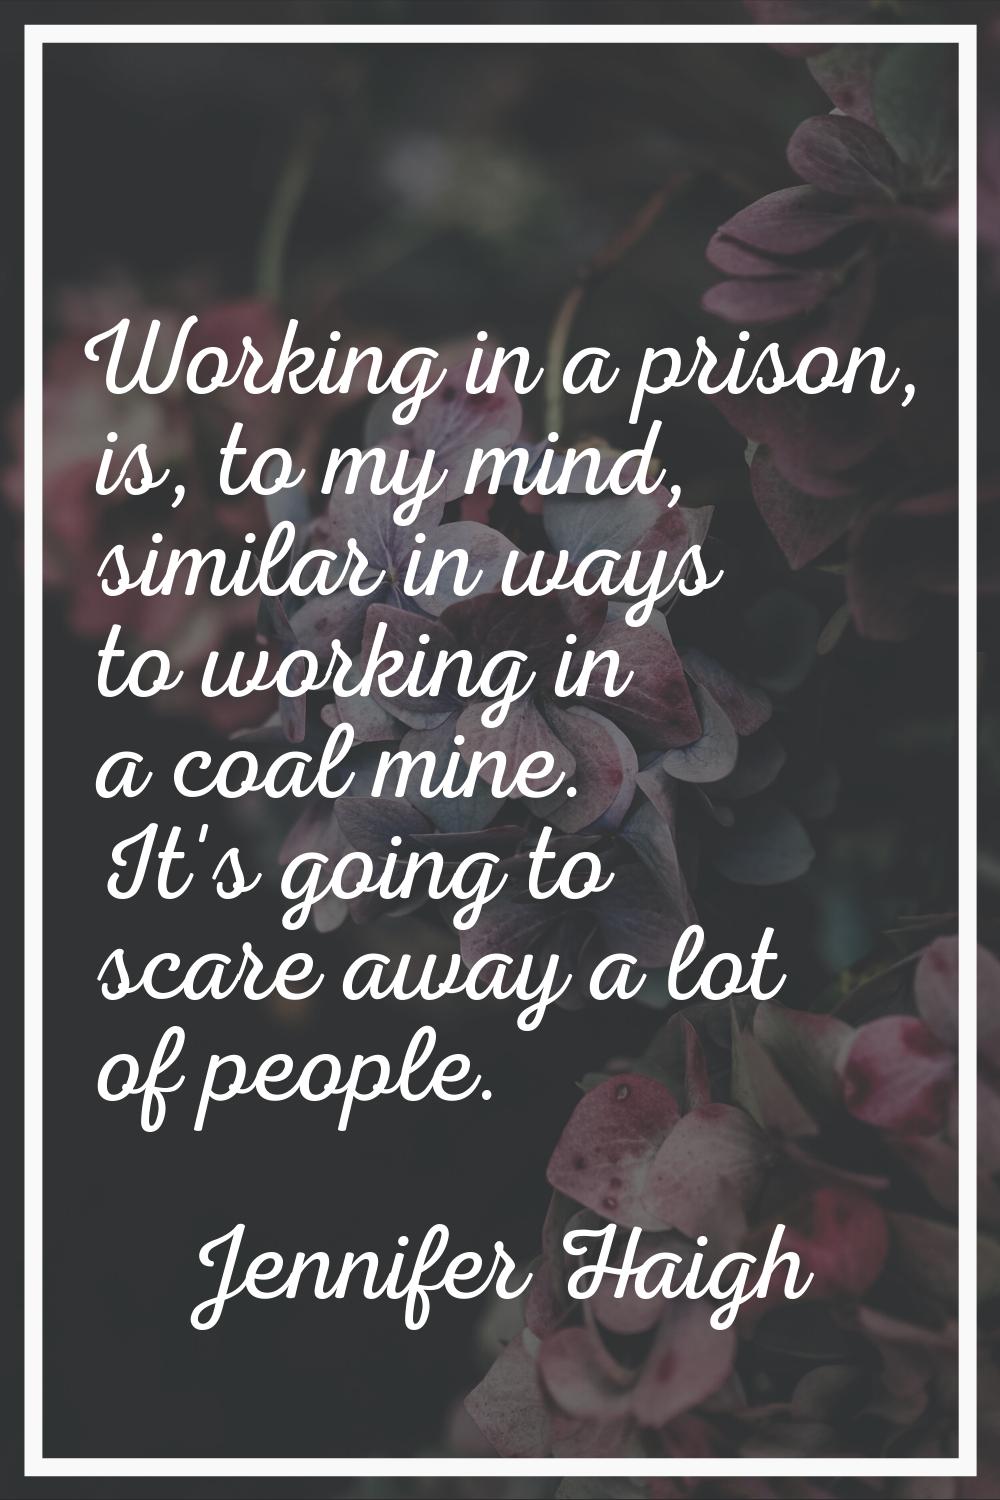 Working in a prison, is, to my mind, similar in ways to working in a coal mine. It's going to scare